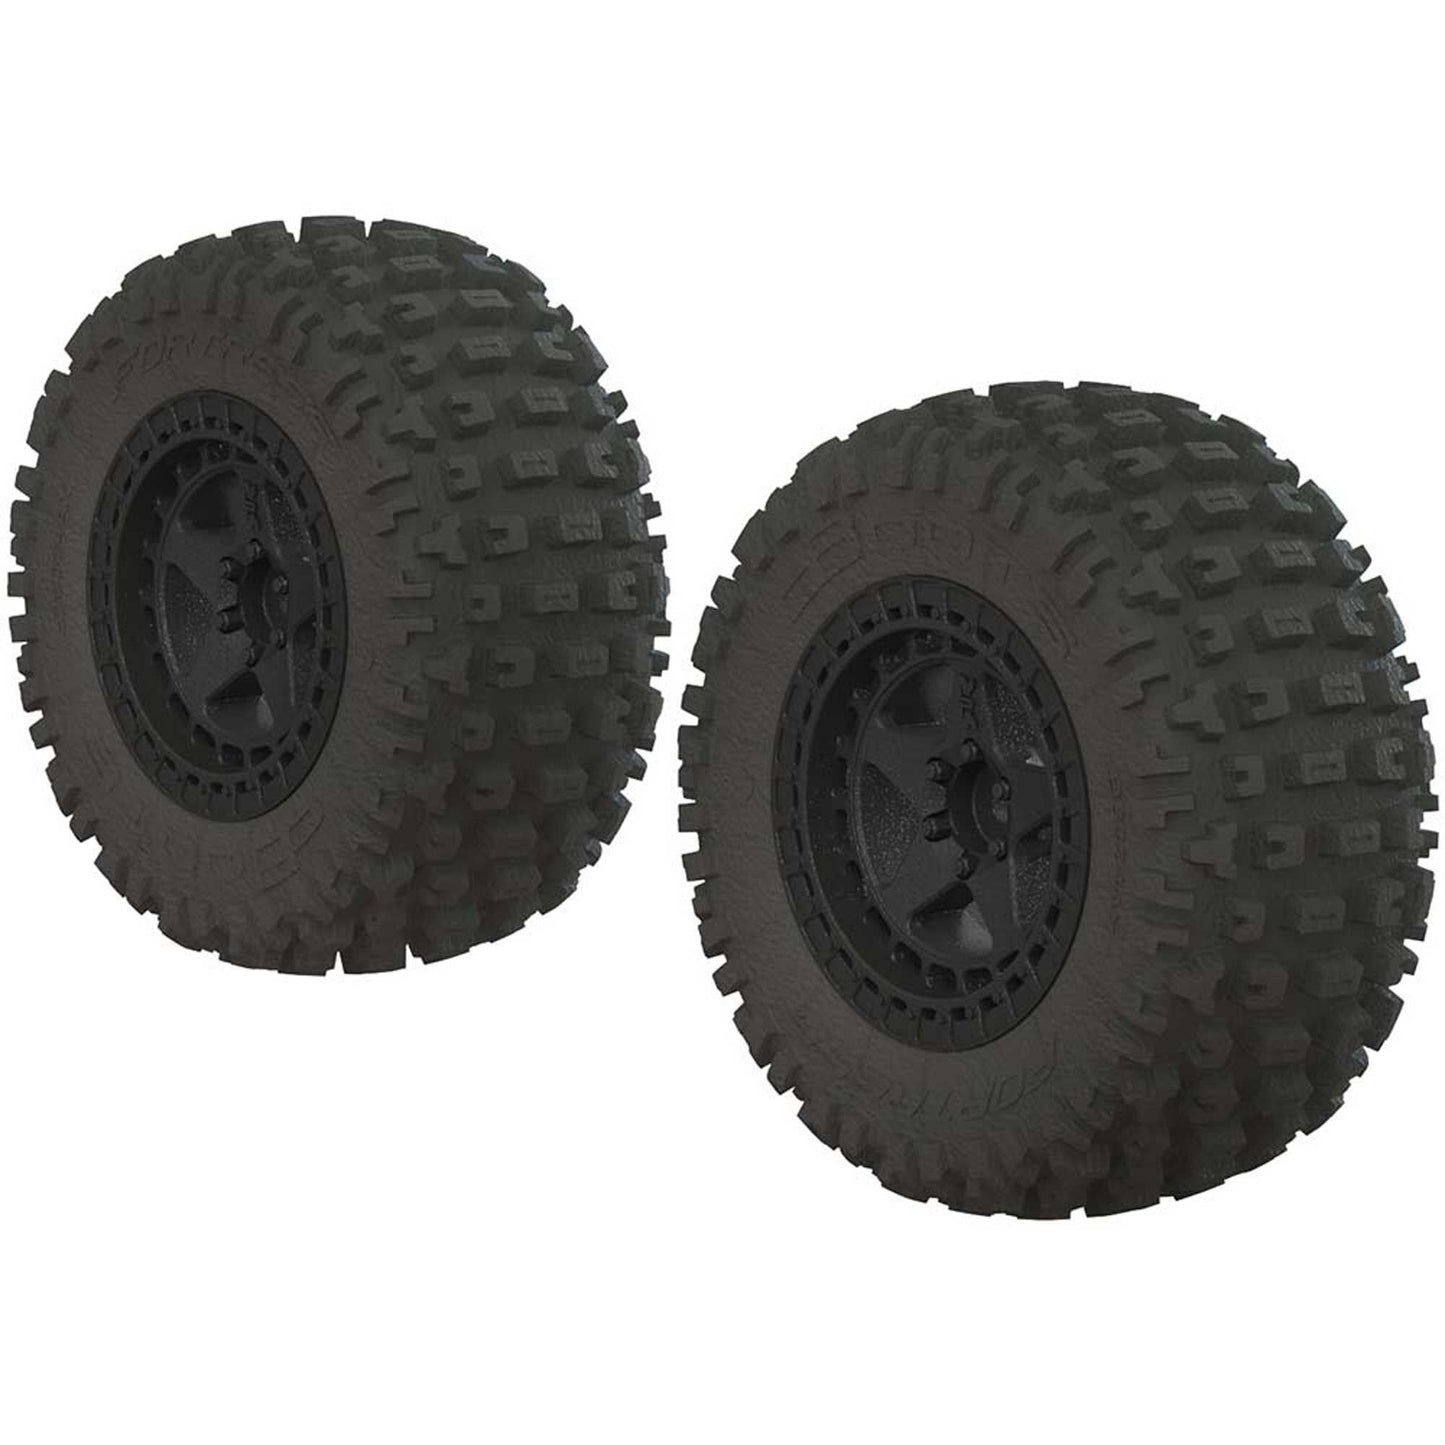 1/10 dBoots Fortress SC 2.2/3.0 Pre-Mounted Tires  14mm Hex  Black (2)